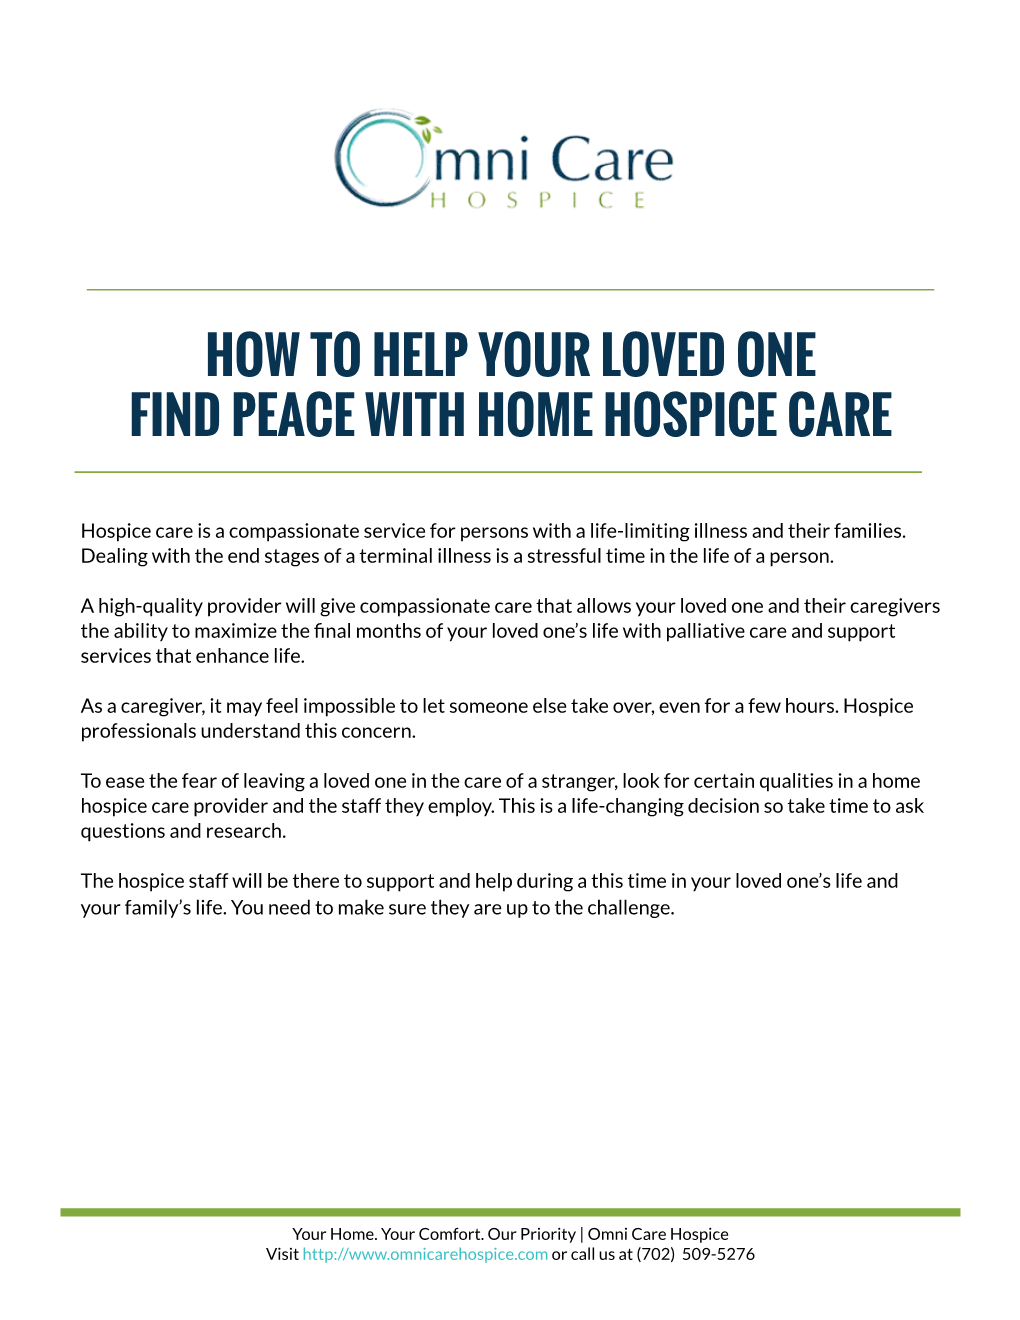 How to Help Your Loved One Find Peace with Home Hospice Care